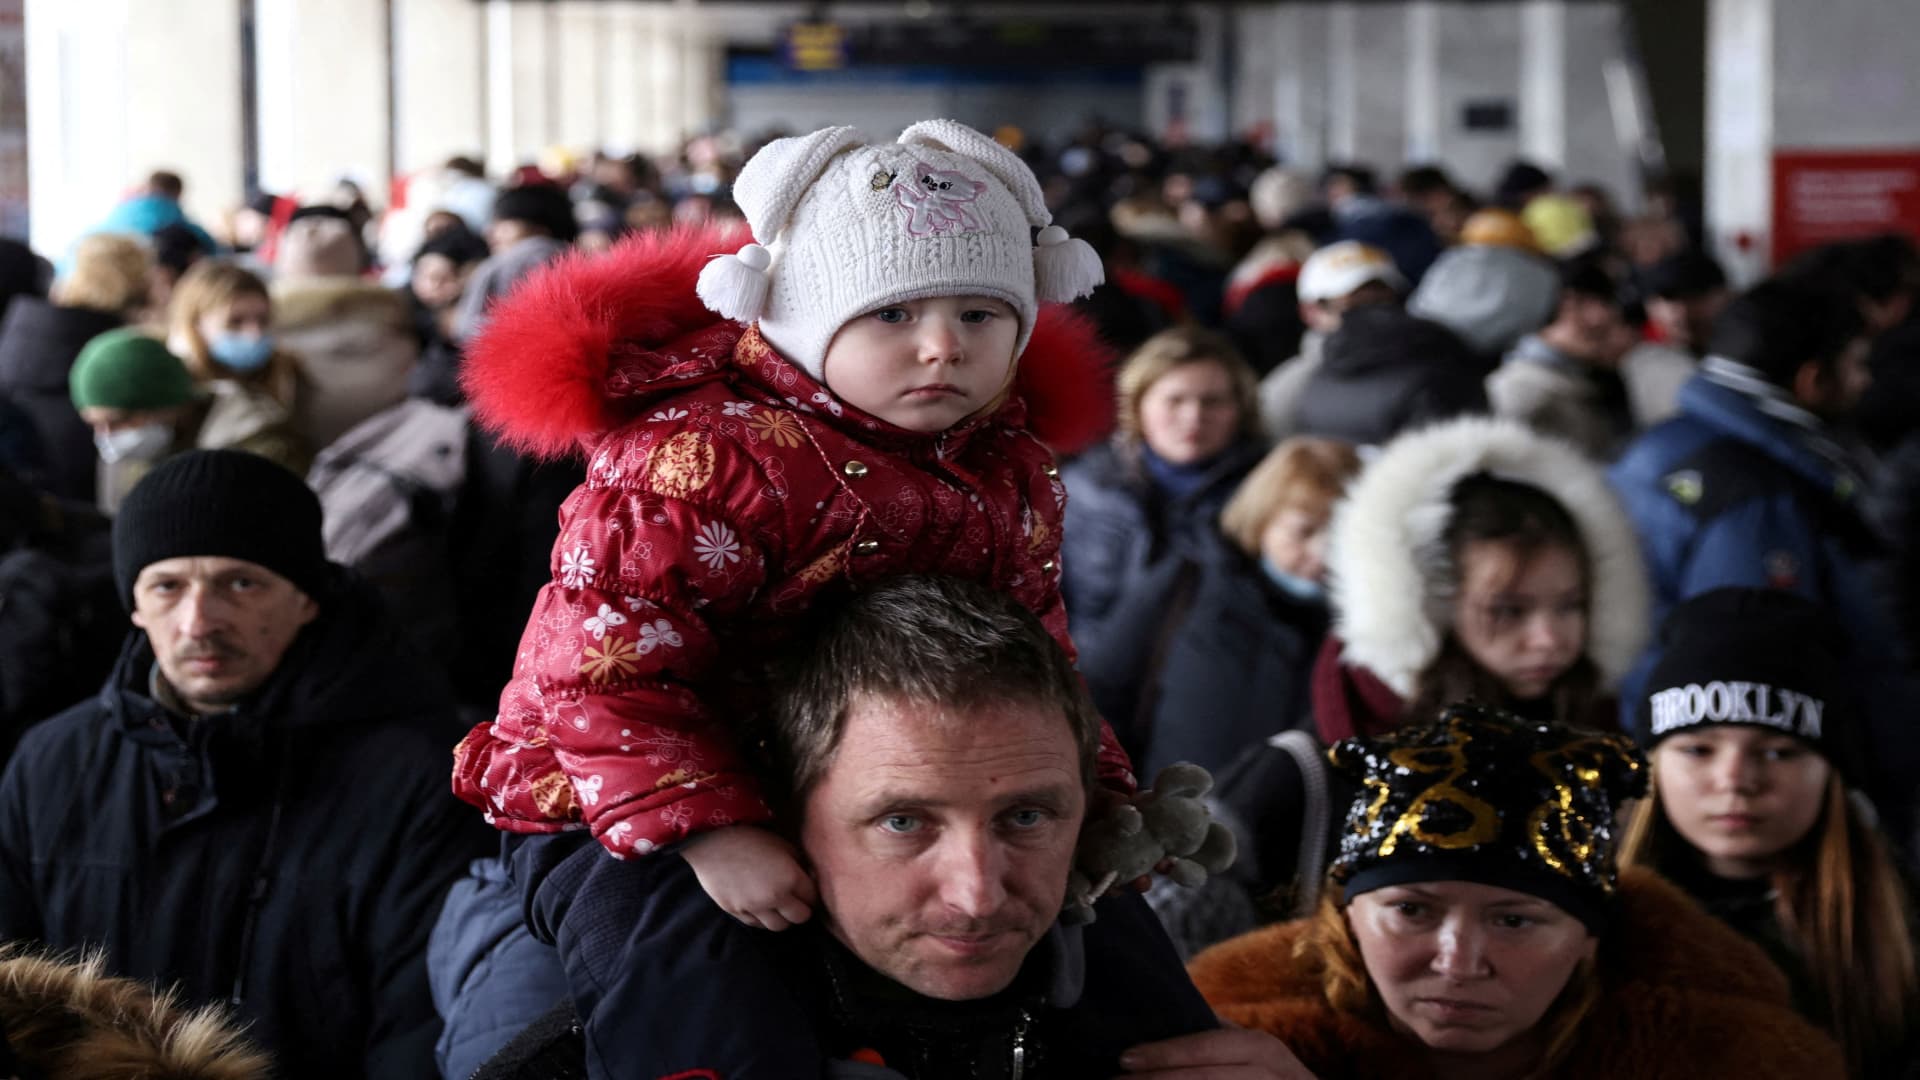 People wait to board an evacuation train from Kyiv to Lviv at Kyiv central train station following Russia's invasion of Ukraine, in Kyiv, Ukraine March 1, 2022.